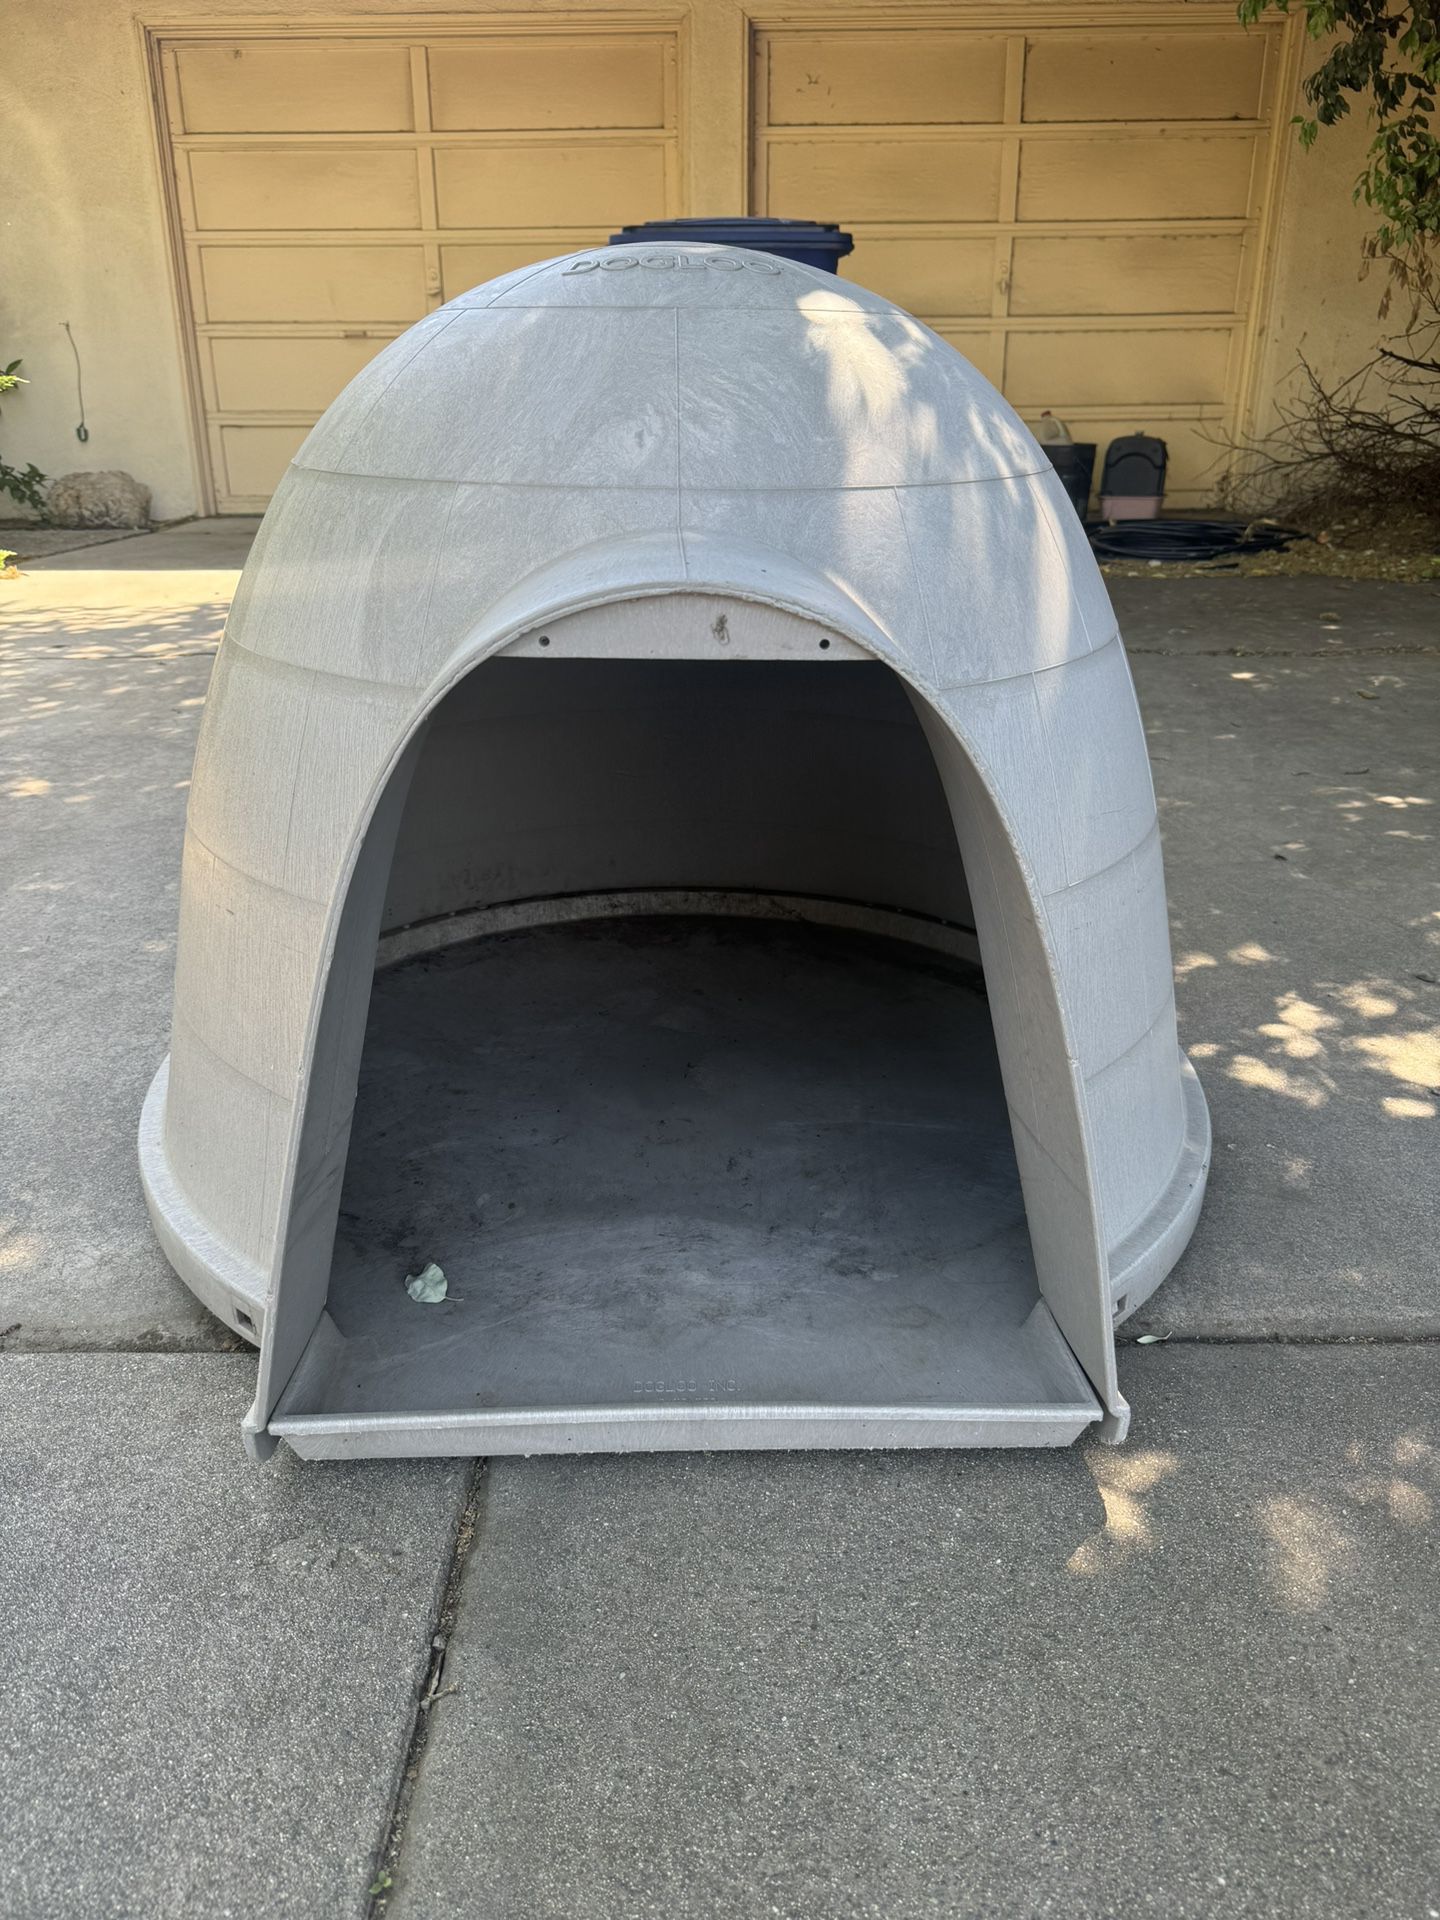 XL Dog House In Excellent Condition!